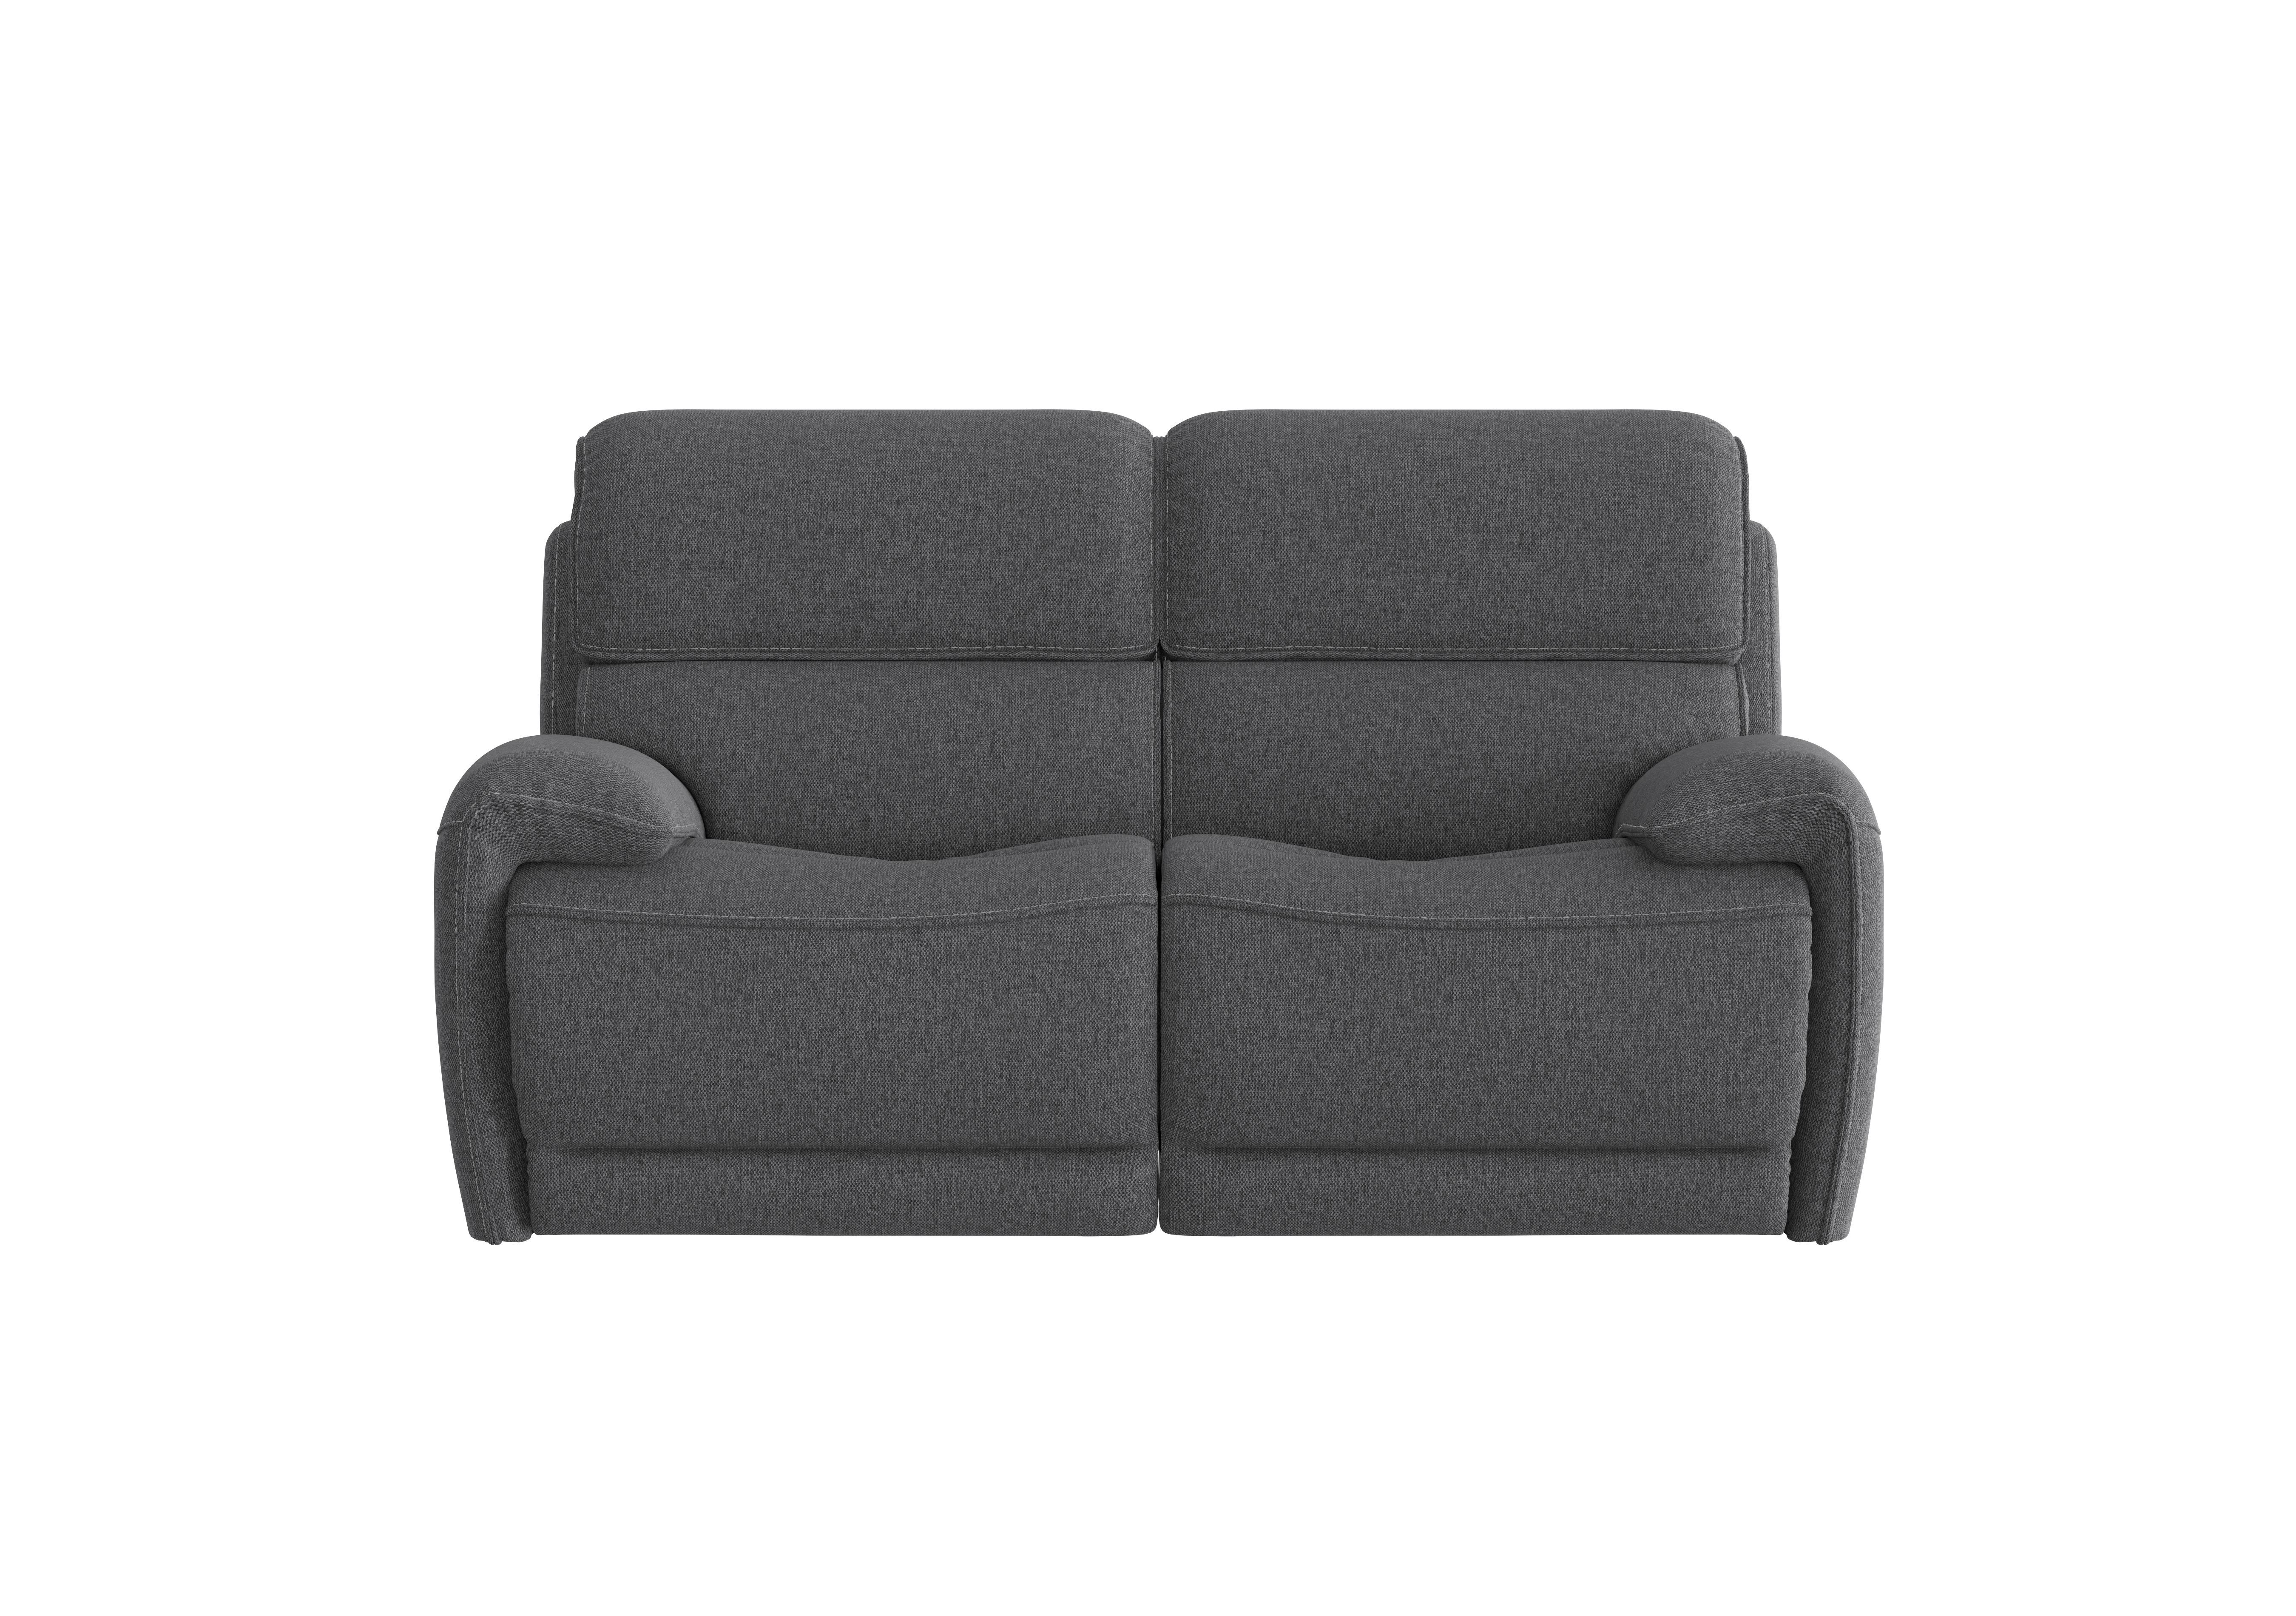 Link 2 Seater Fabric Power Recliner Sofa with Power Headrests in Fab-Blt-R39 Charcoal on Furniture Village